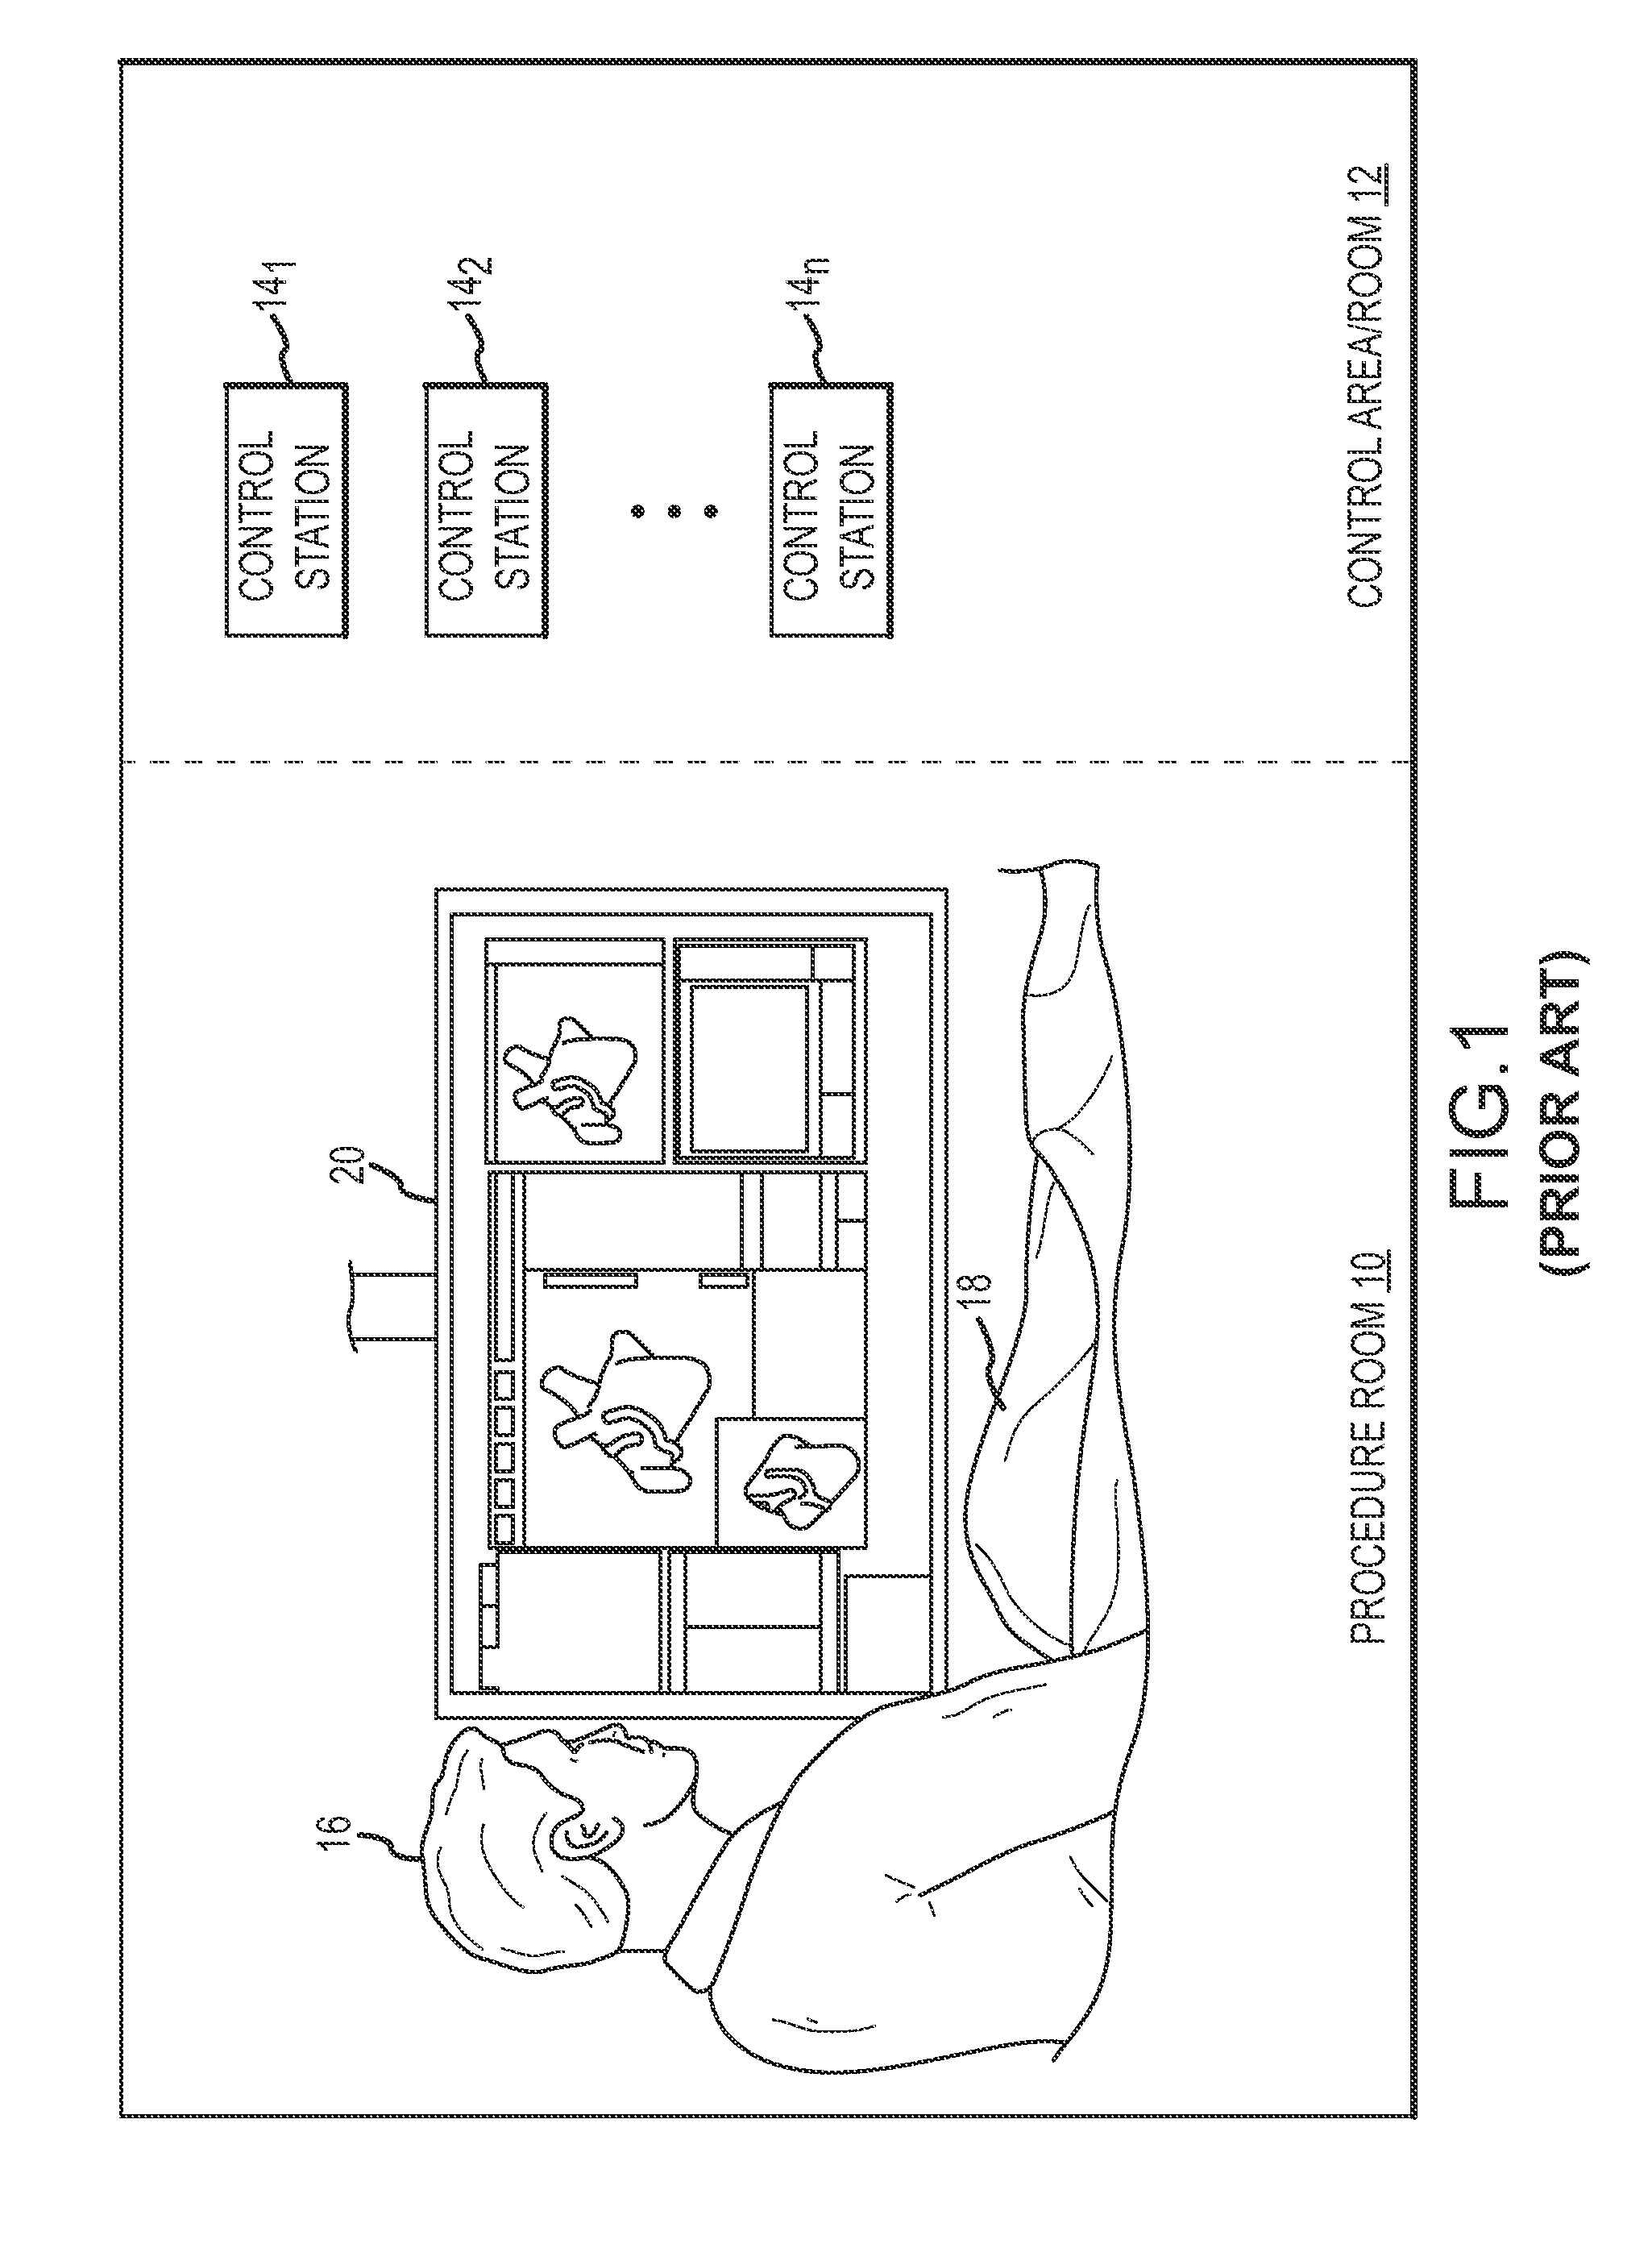 System and method for controlling a remote medical device guidance system in three-dimensions using gestures